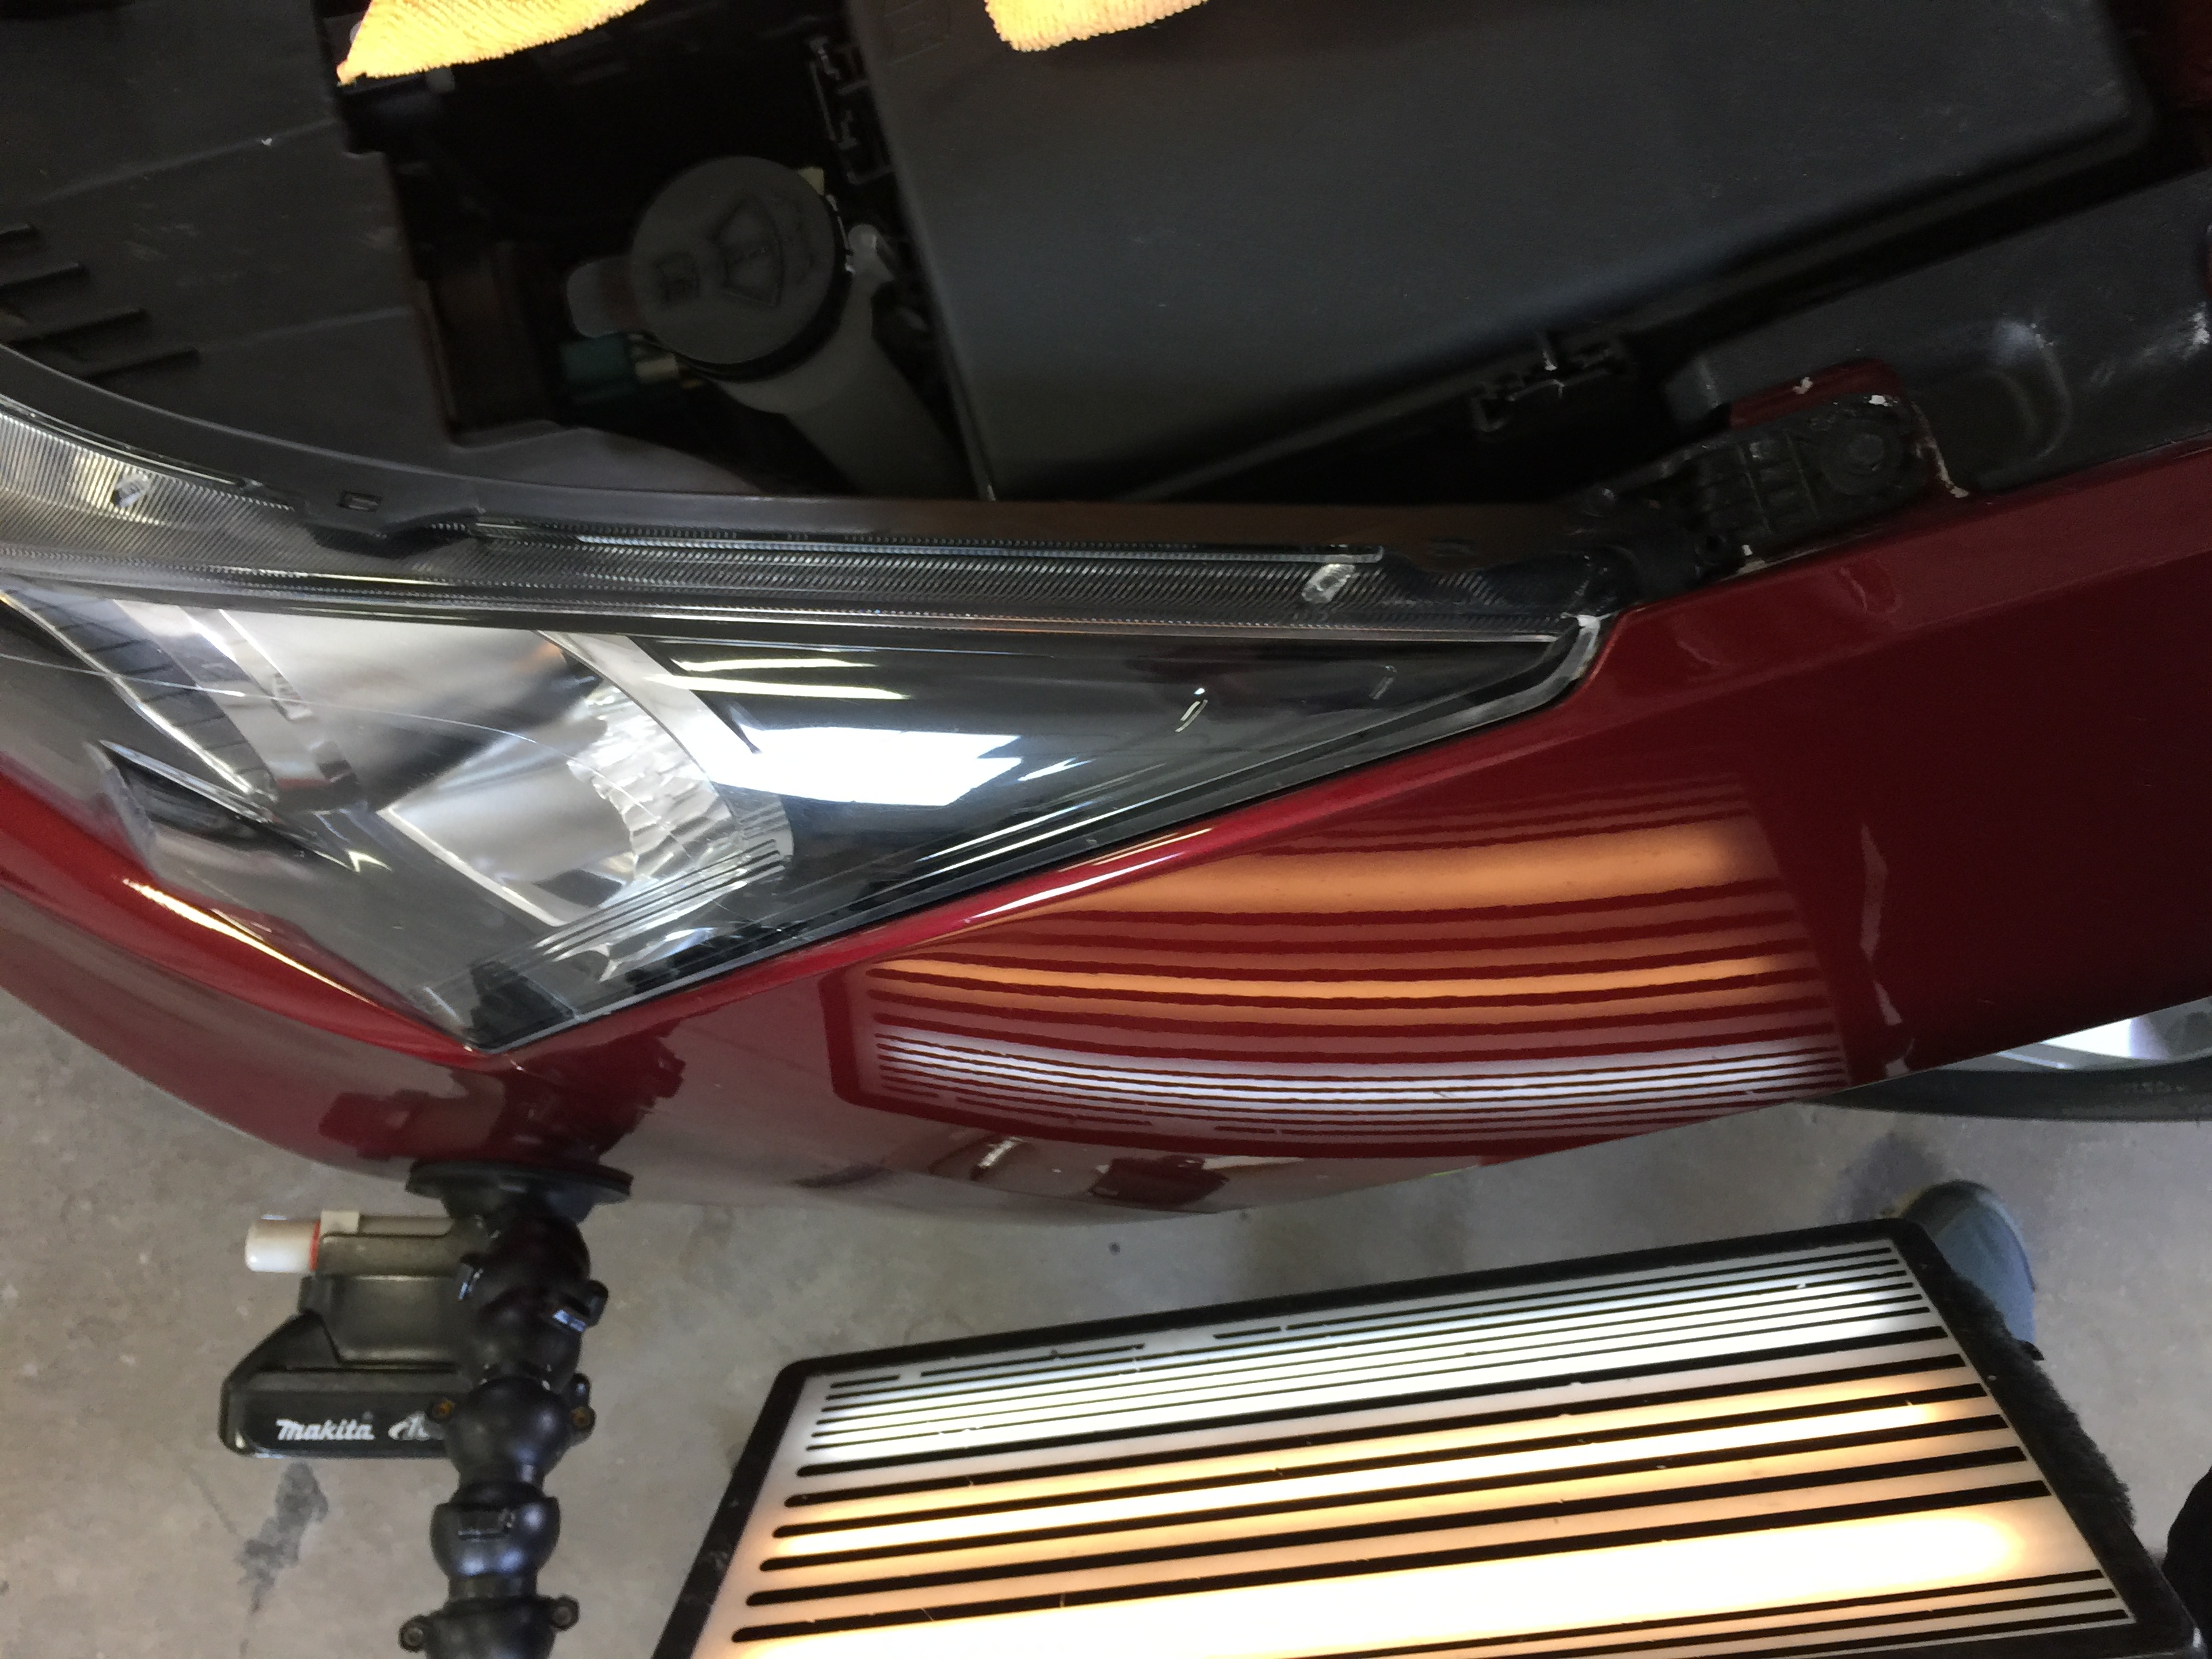 2015 Chevy Cruze Dent Removal on Drivers Fender | Dent Repair | Springfield, IL. Http://217dent.com